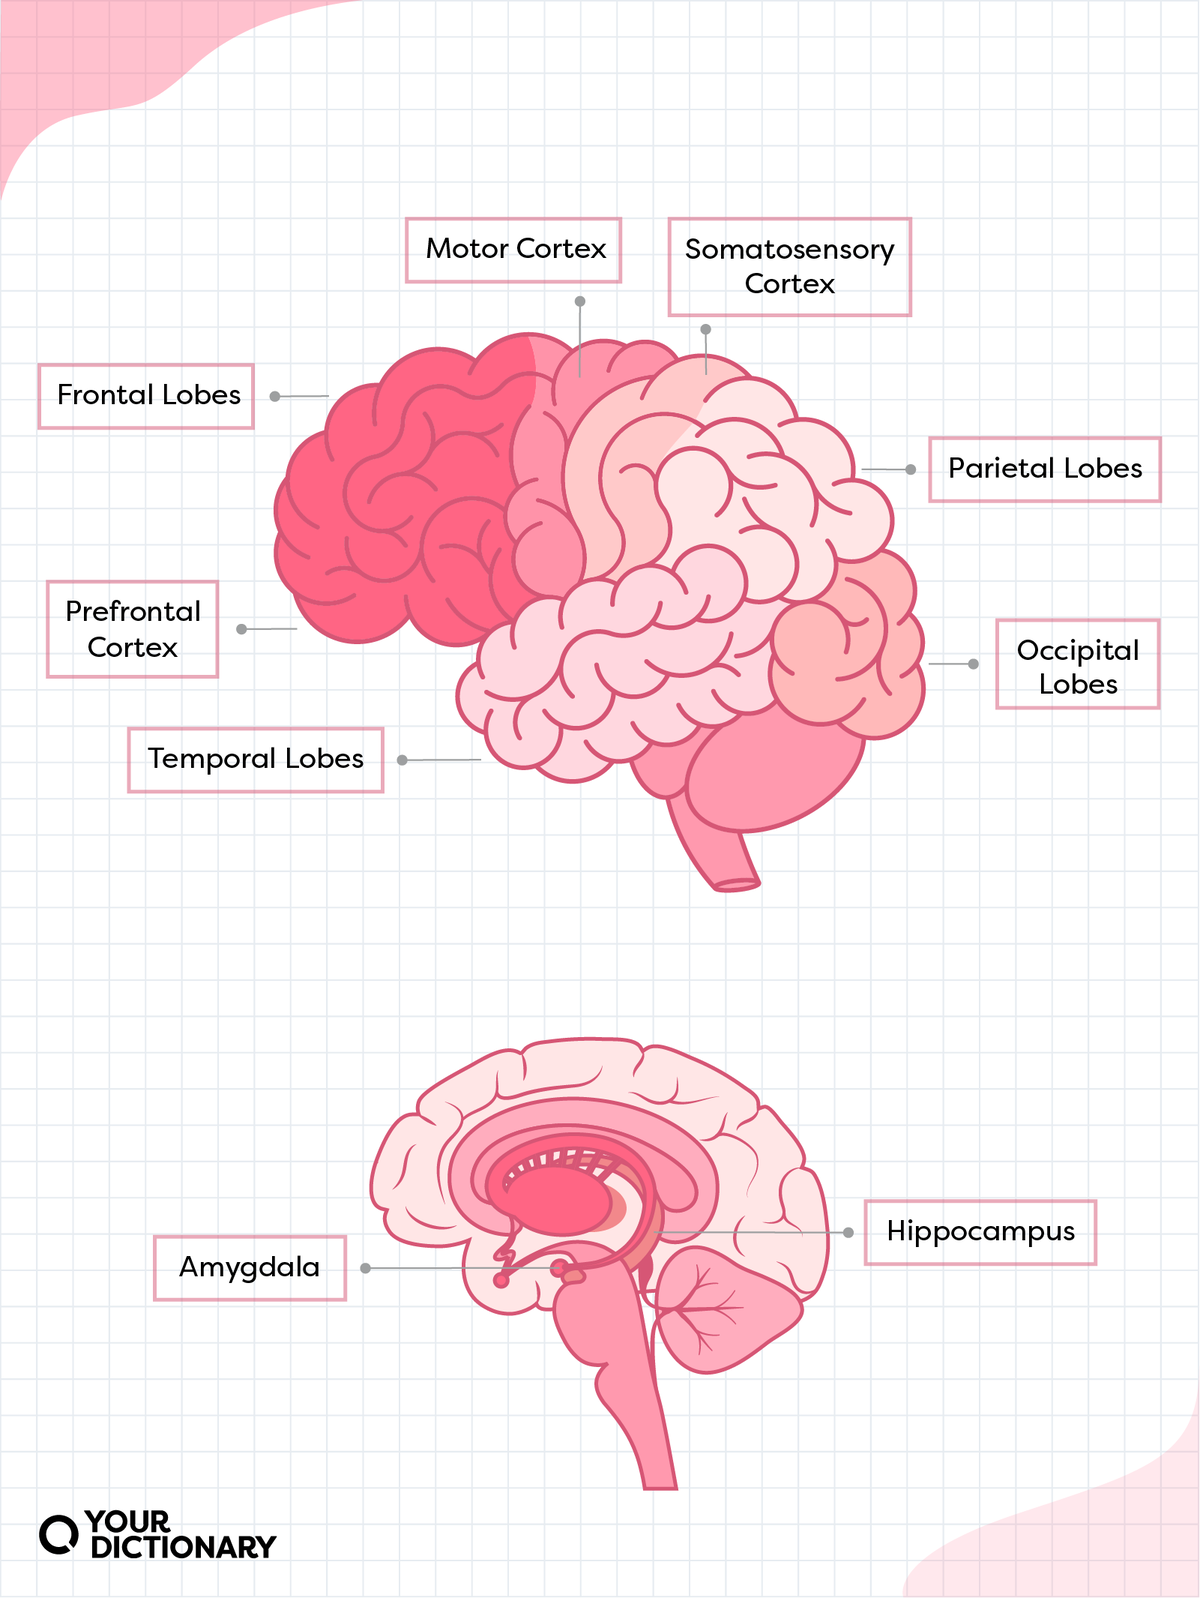 Diagram of the brain labelling the cortexes and lobes as well as the hippocampus and amygdala